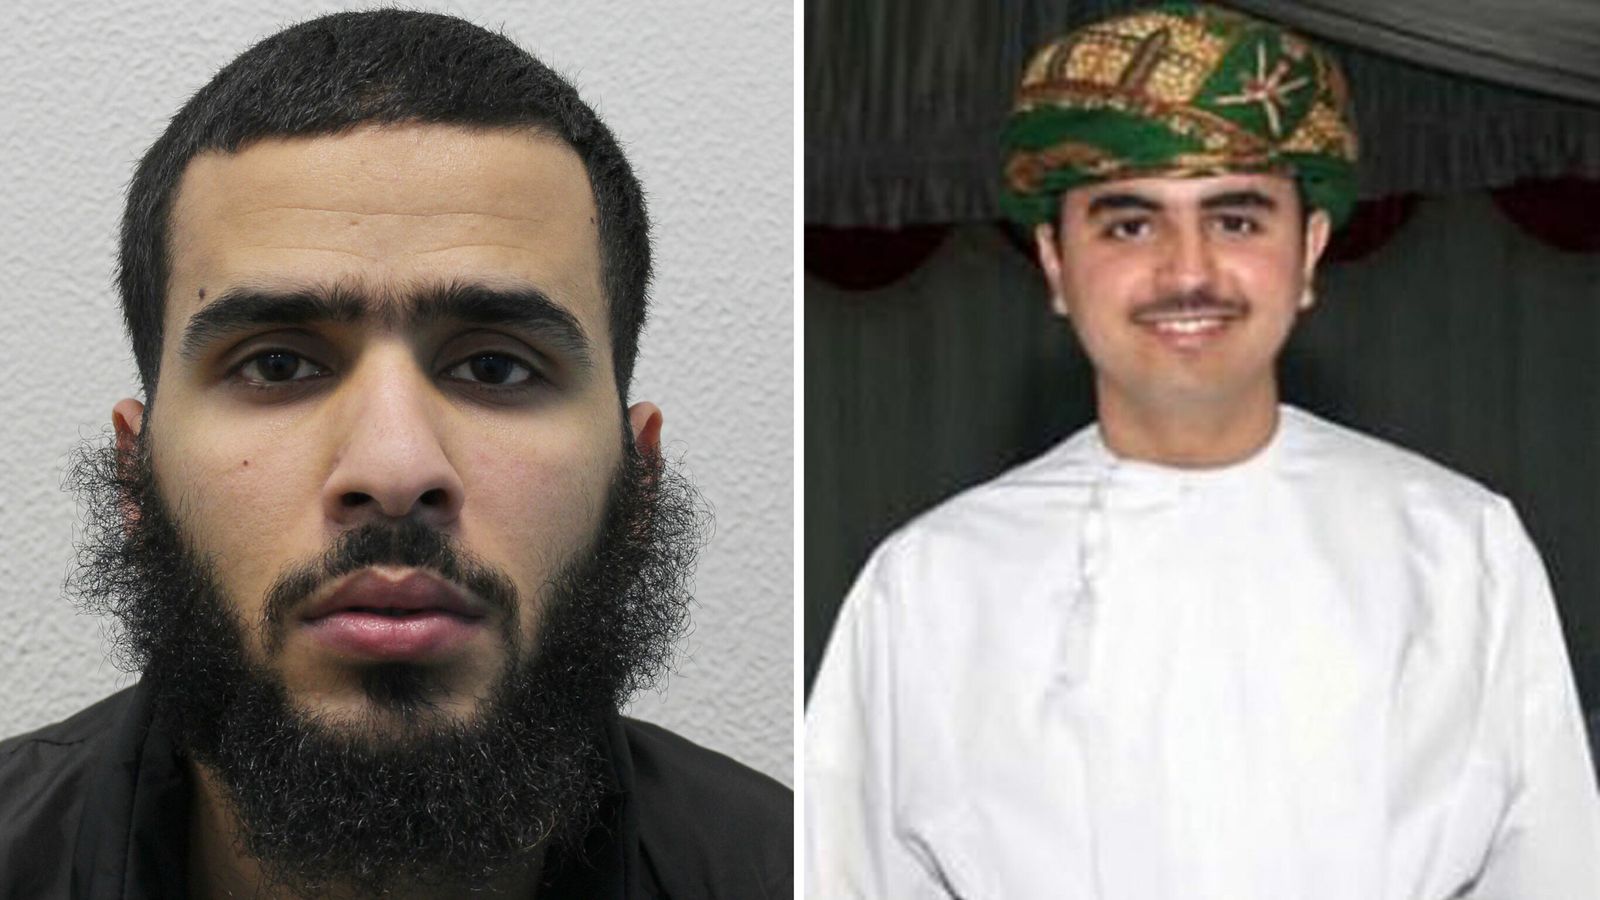 Man Who Killed Sheikh Abdullah Al-Araimi’s son in eight seconds over £37k watch jailed for 27 years